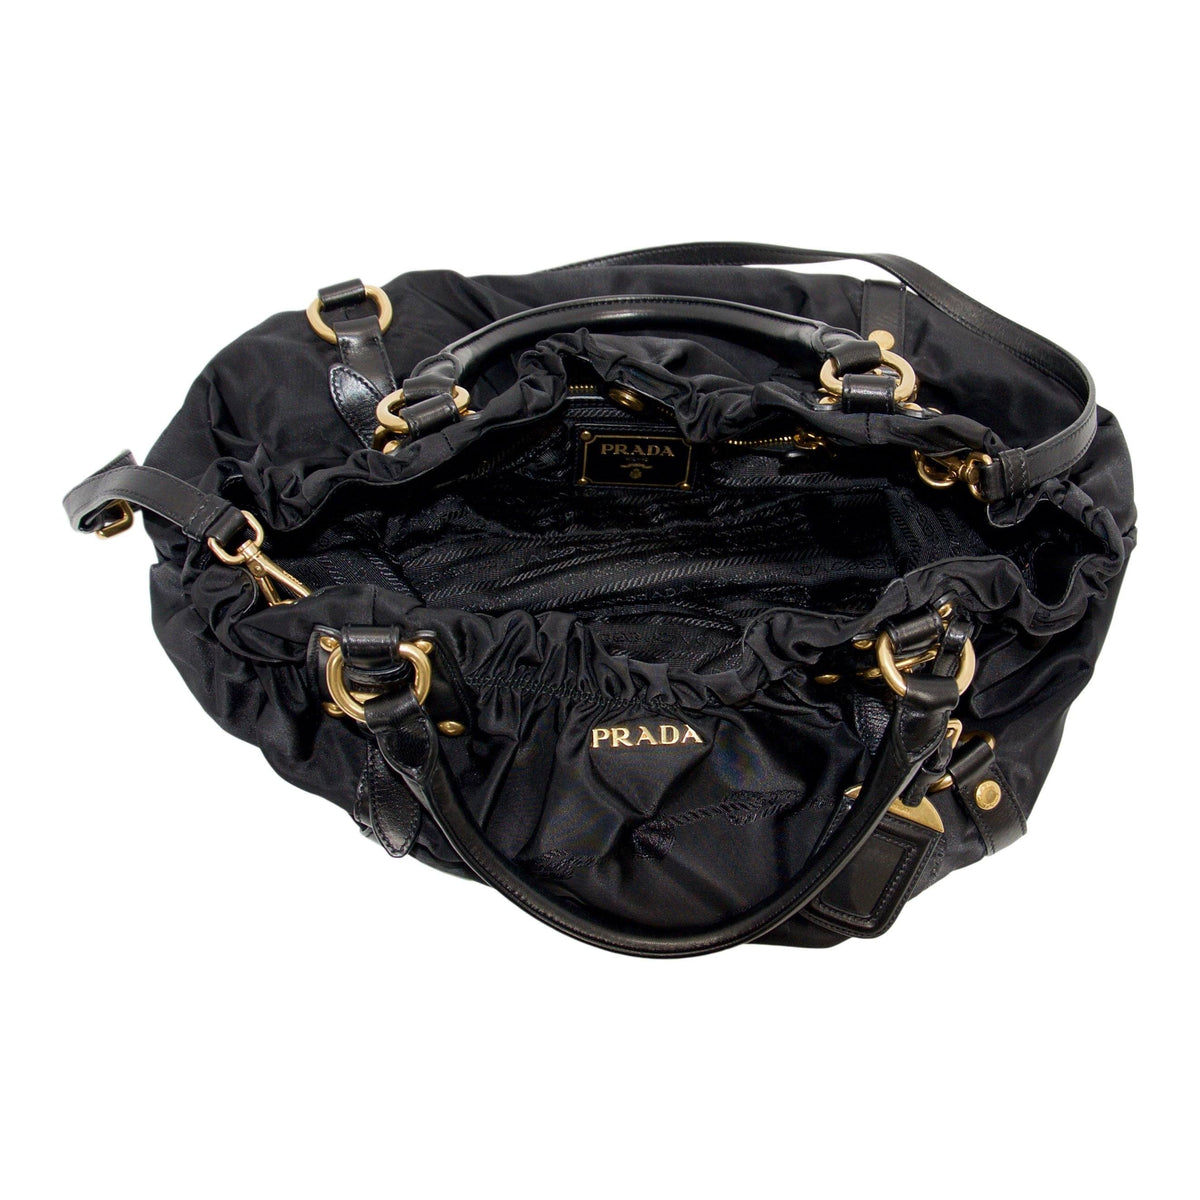 Prada Jacquard Two-way Bag in Very Good Condition 